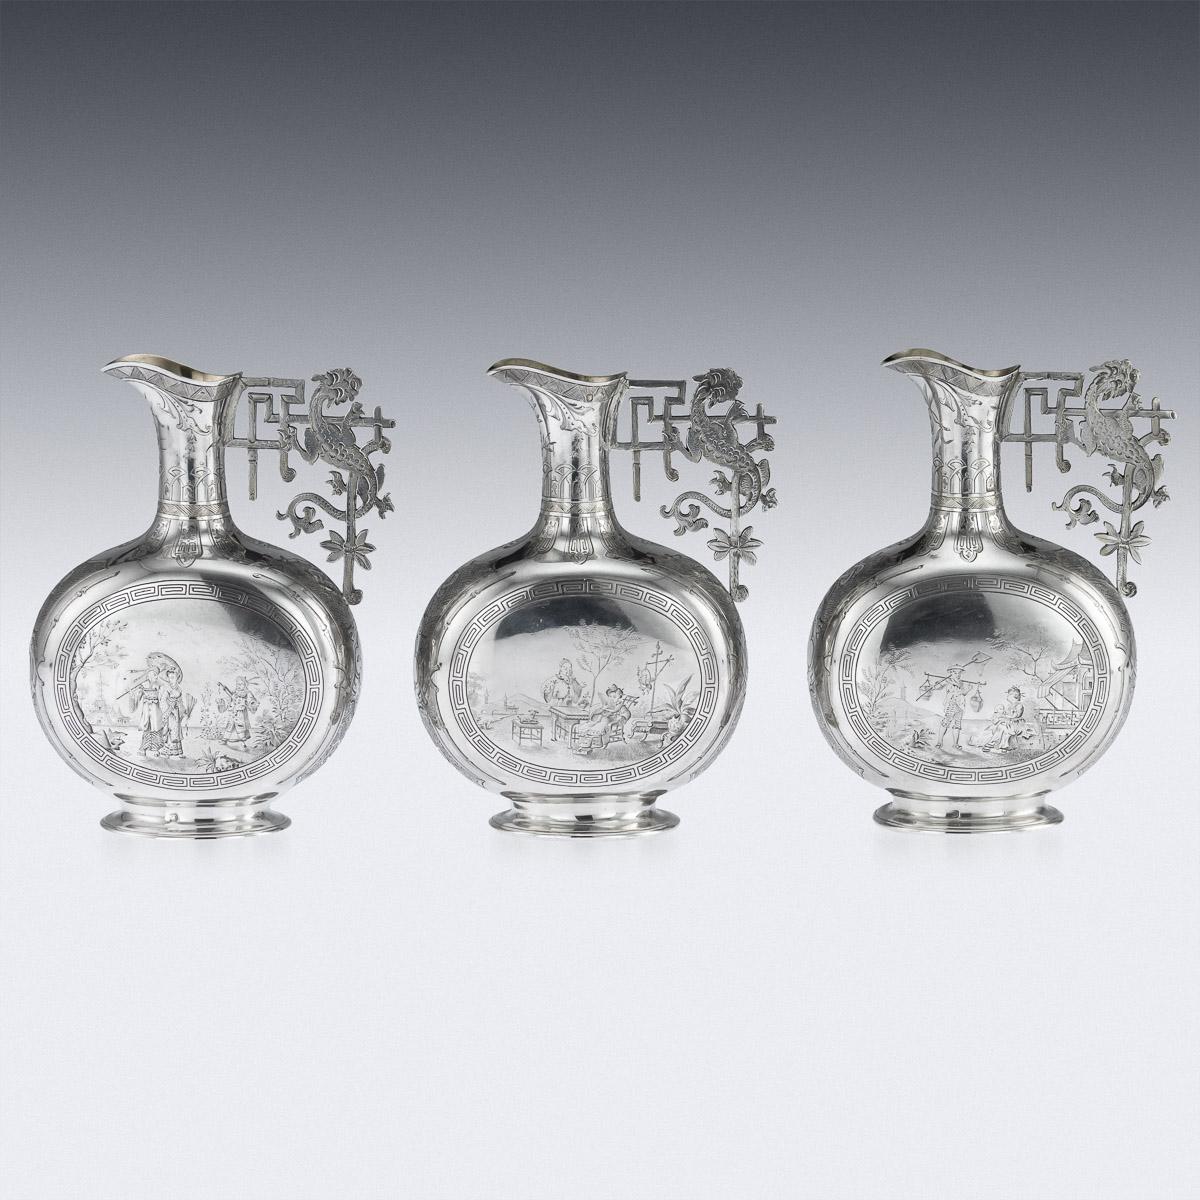 Antique early 19th century French exquisite and rare solid silver set of three dessert wine ewers in chinoiserie style, of Chinese inspired flask vase shape, standing on a spread-oval base and applied with an elaborate dragon and bamboo